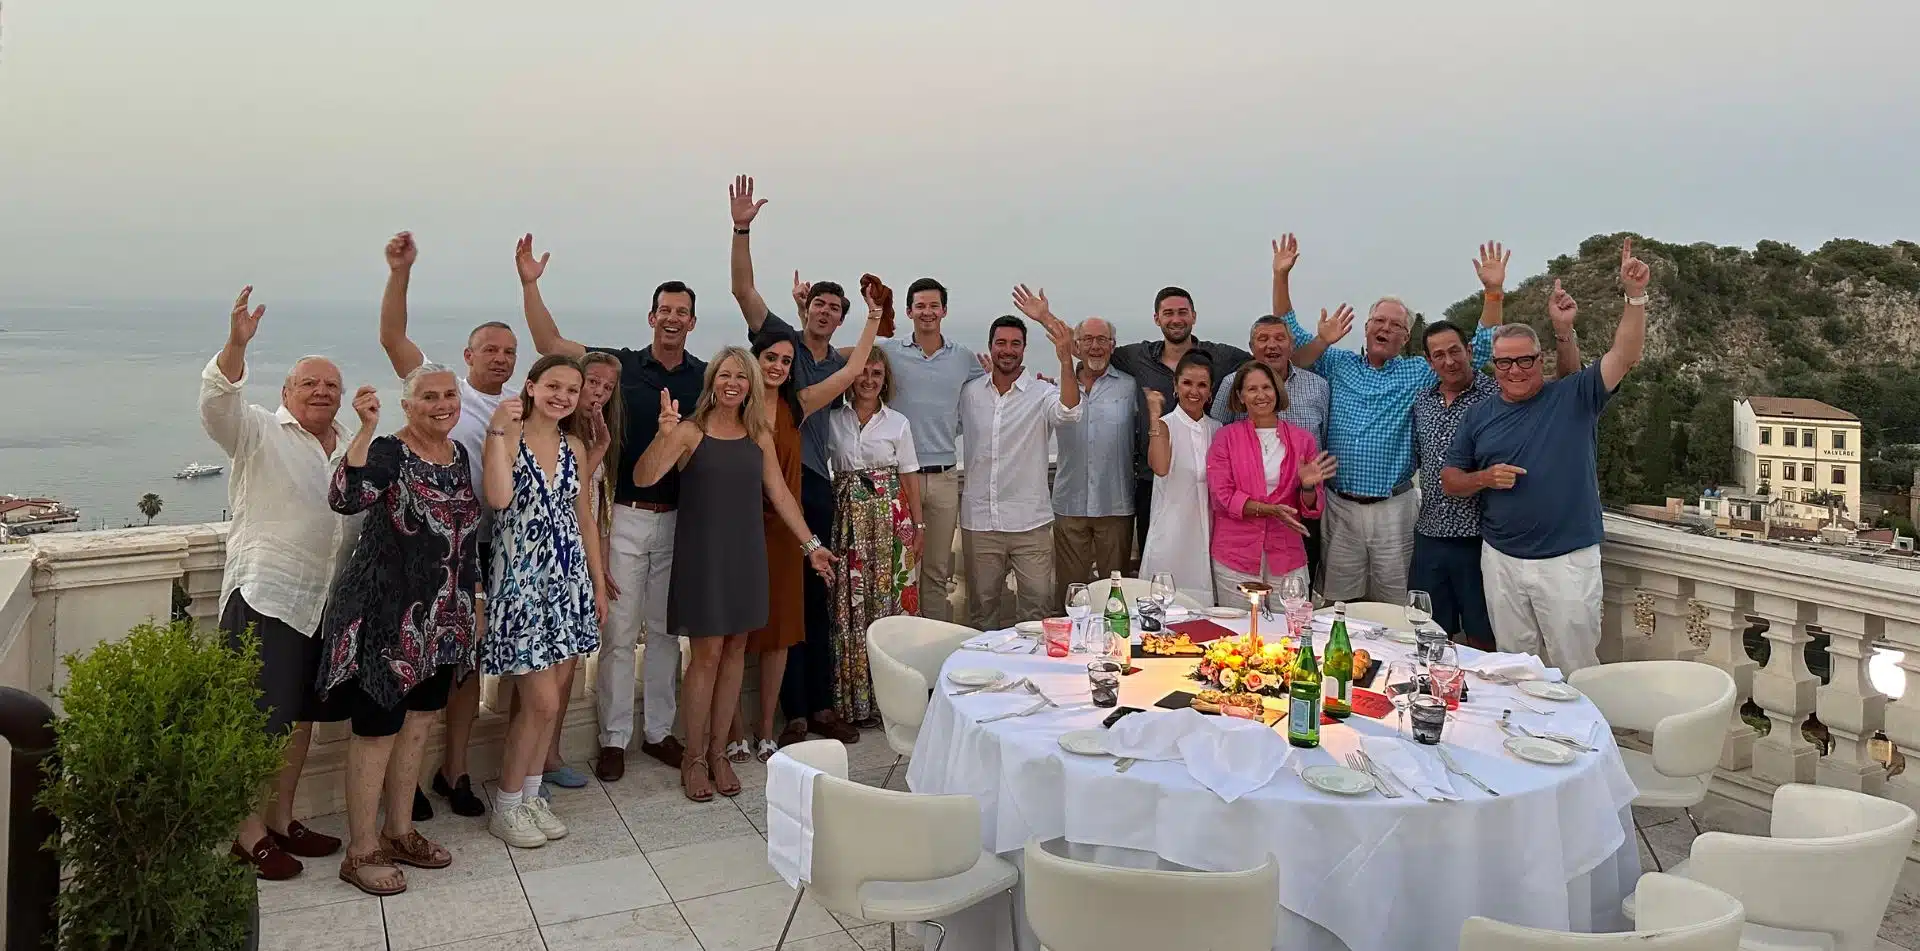 Travelers enjoying their time on tour in Sicily, Italy